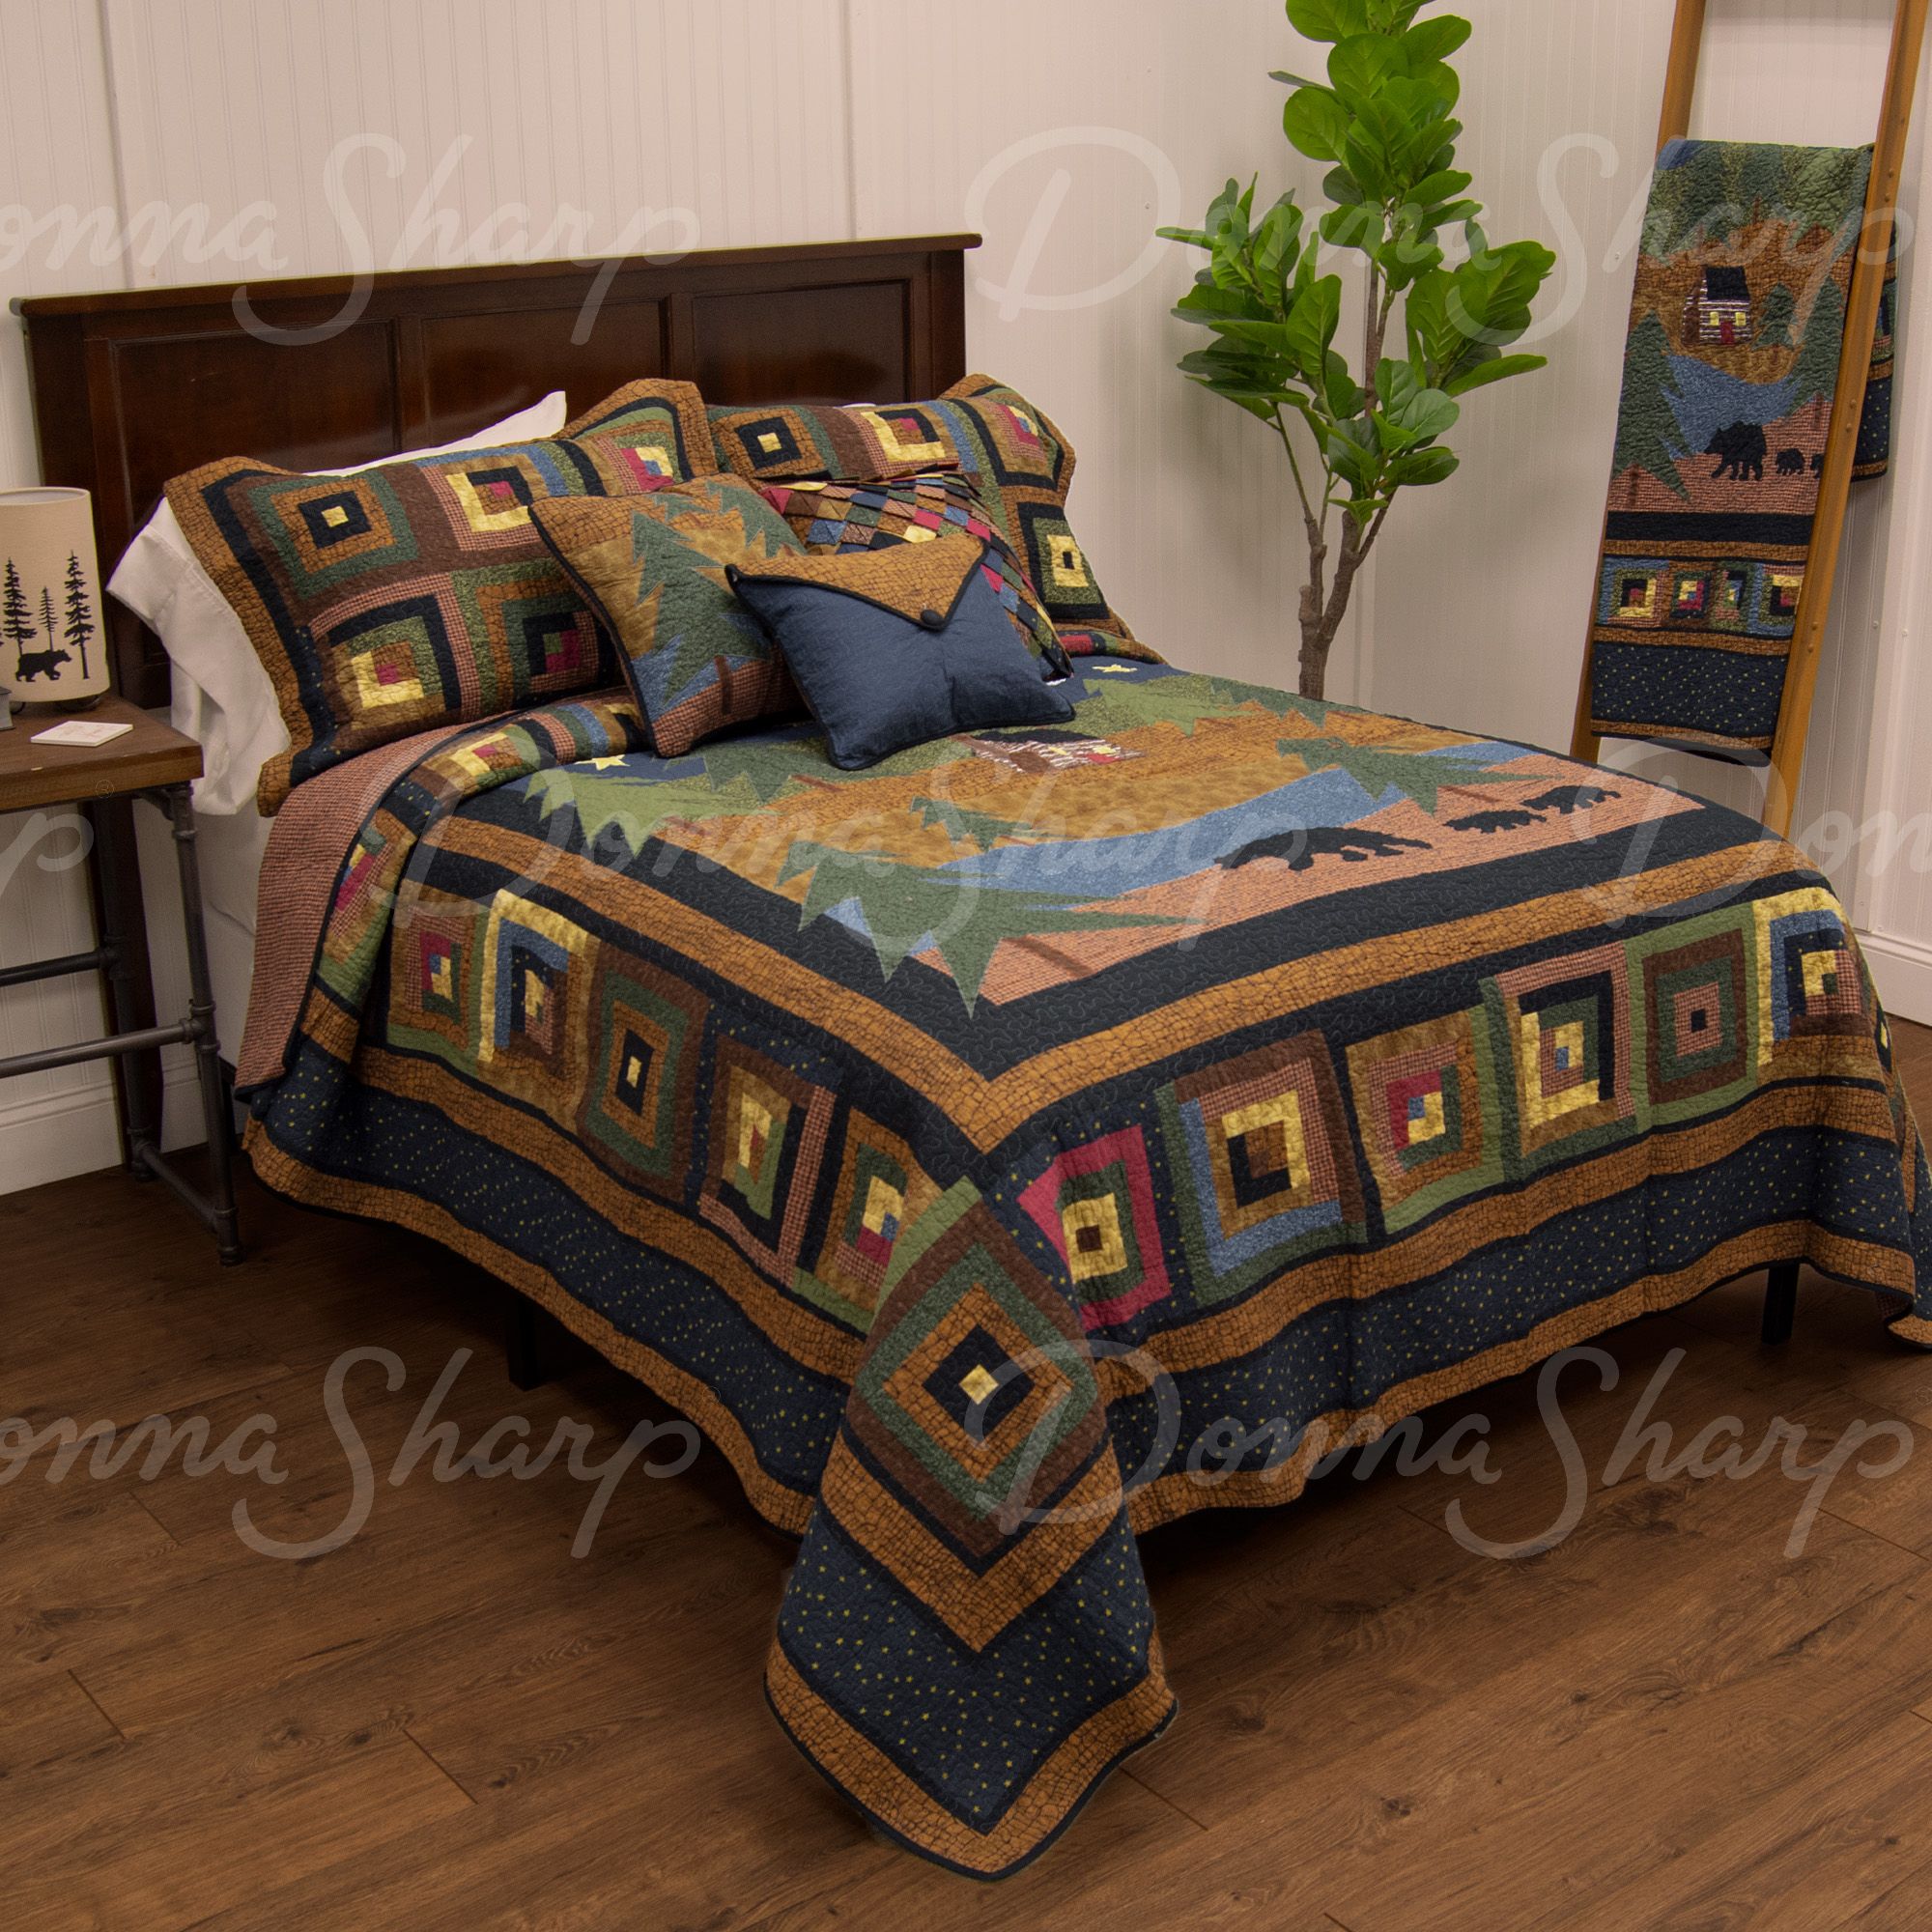 Cabin & Lodge, On Sale Donna Sharp Quilts and Bedspreads - Bed Bath & Beyond